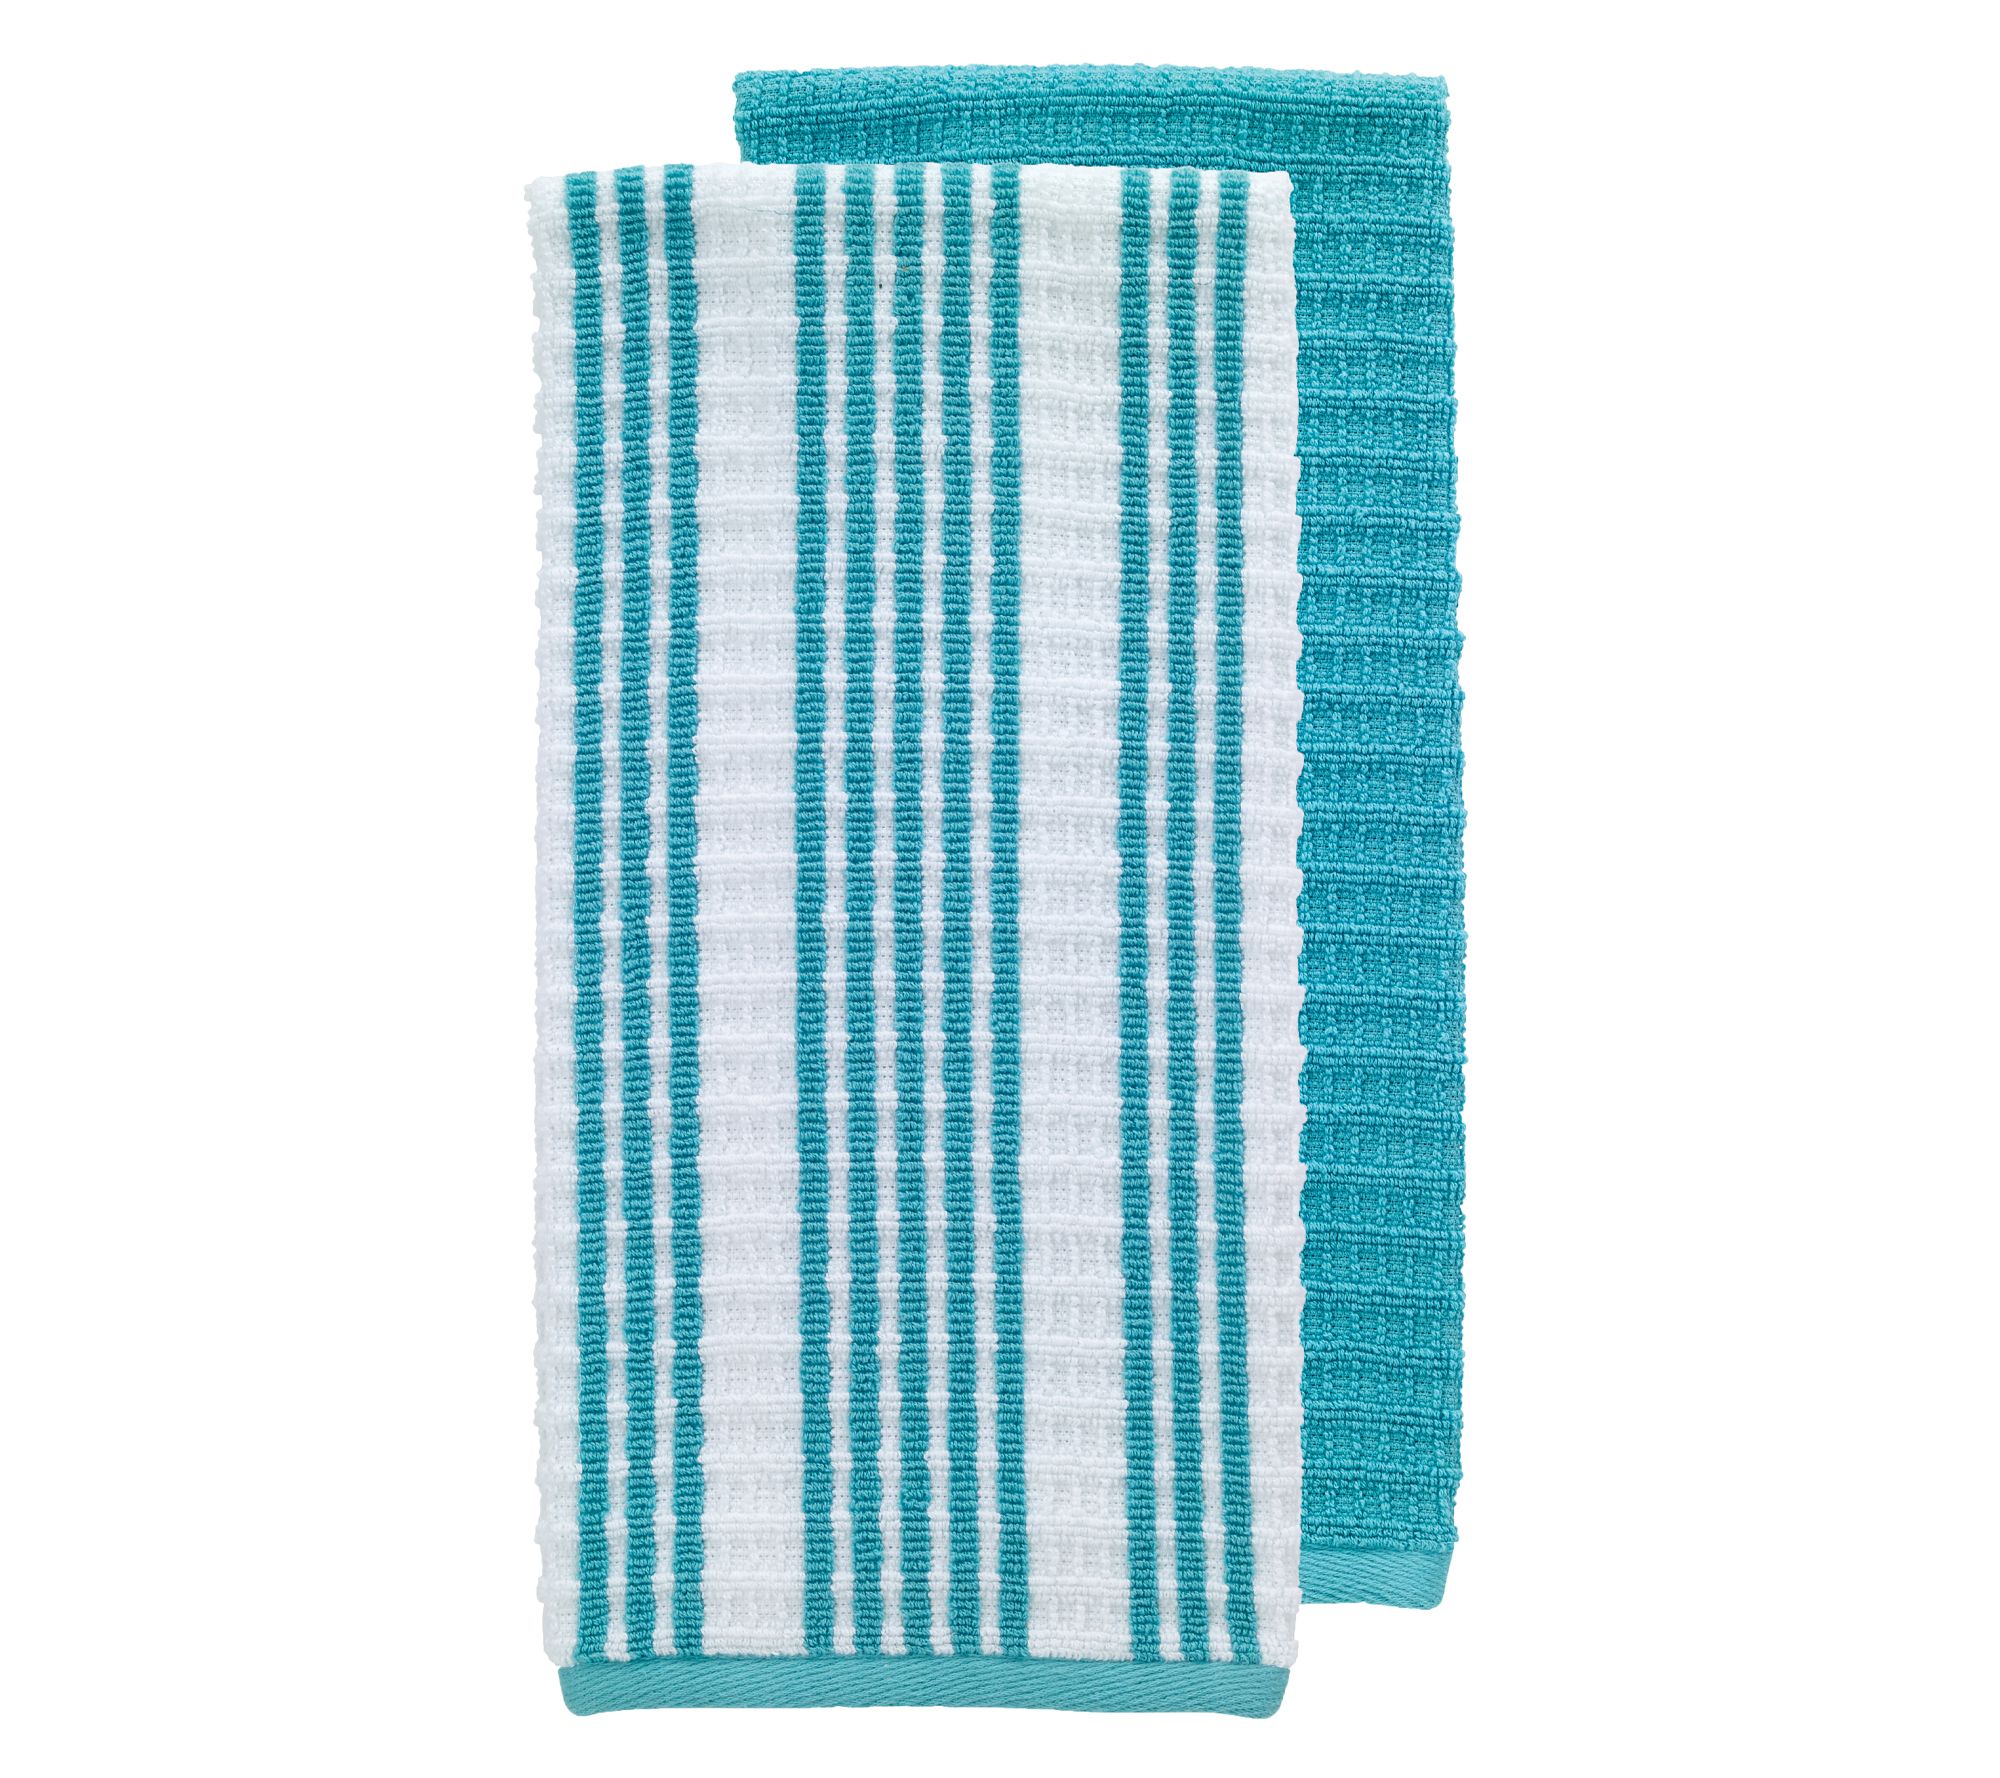 RITZ T-fal Grey Solid and Stripe Cotton Waffle Terry Kitchen Towel